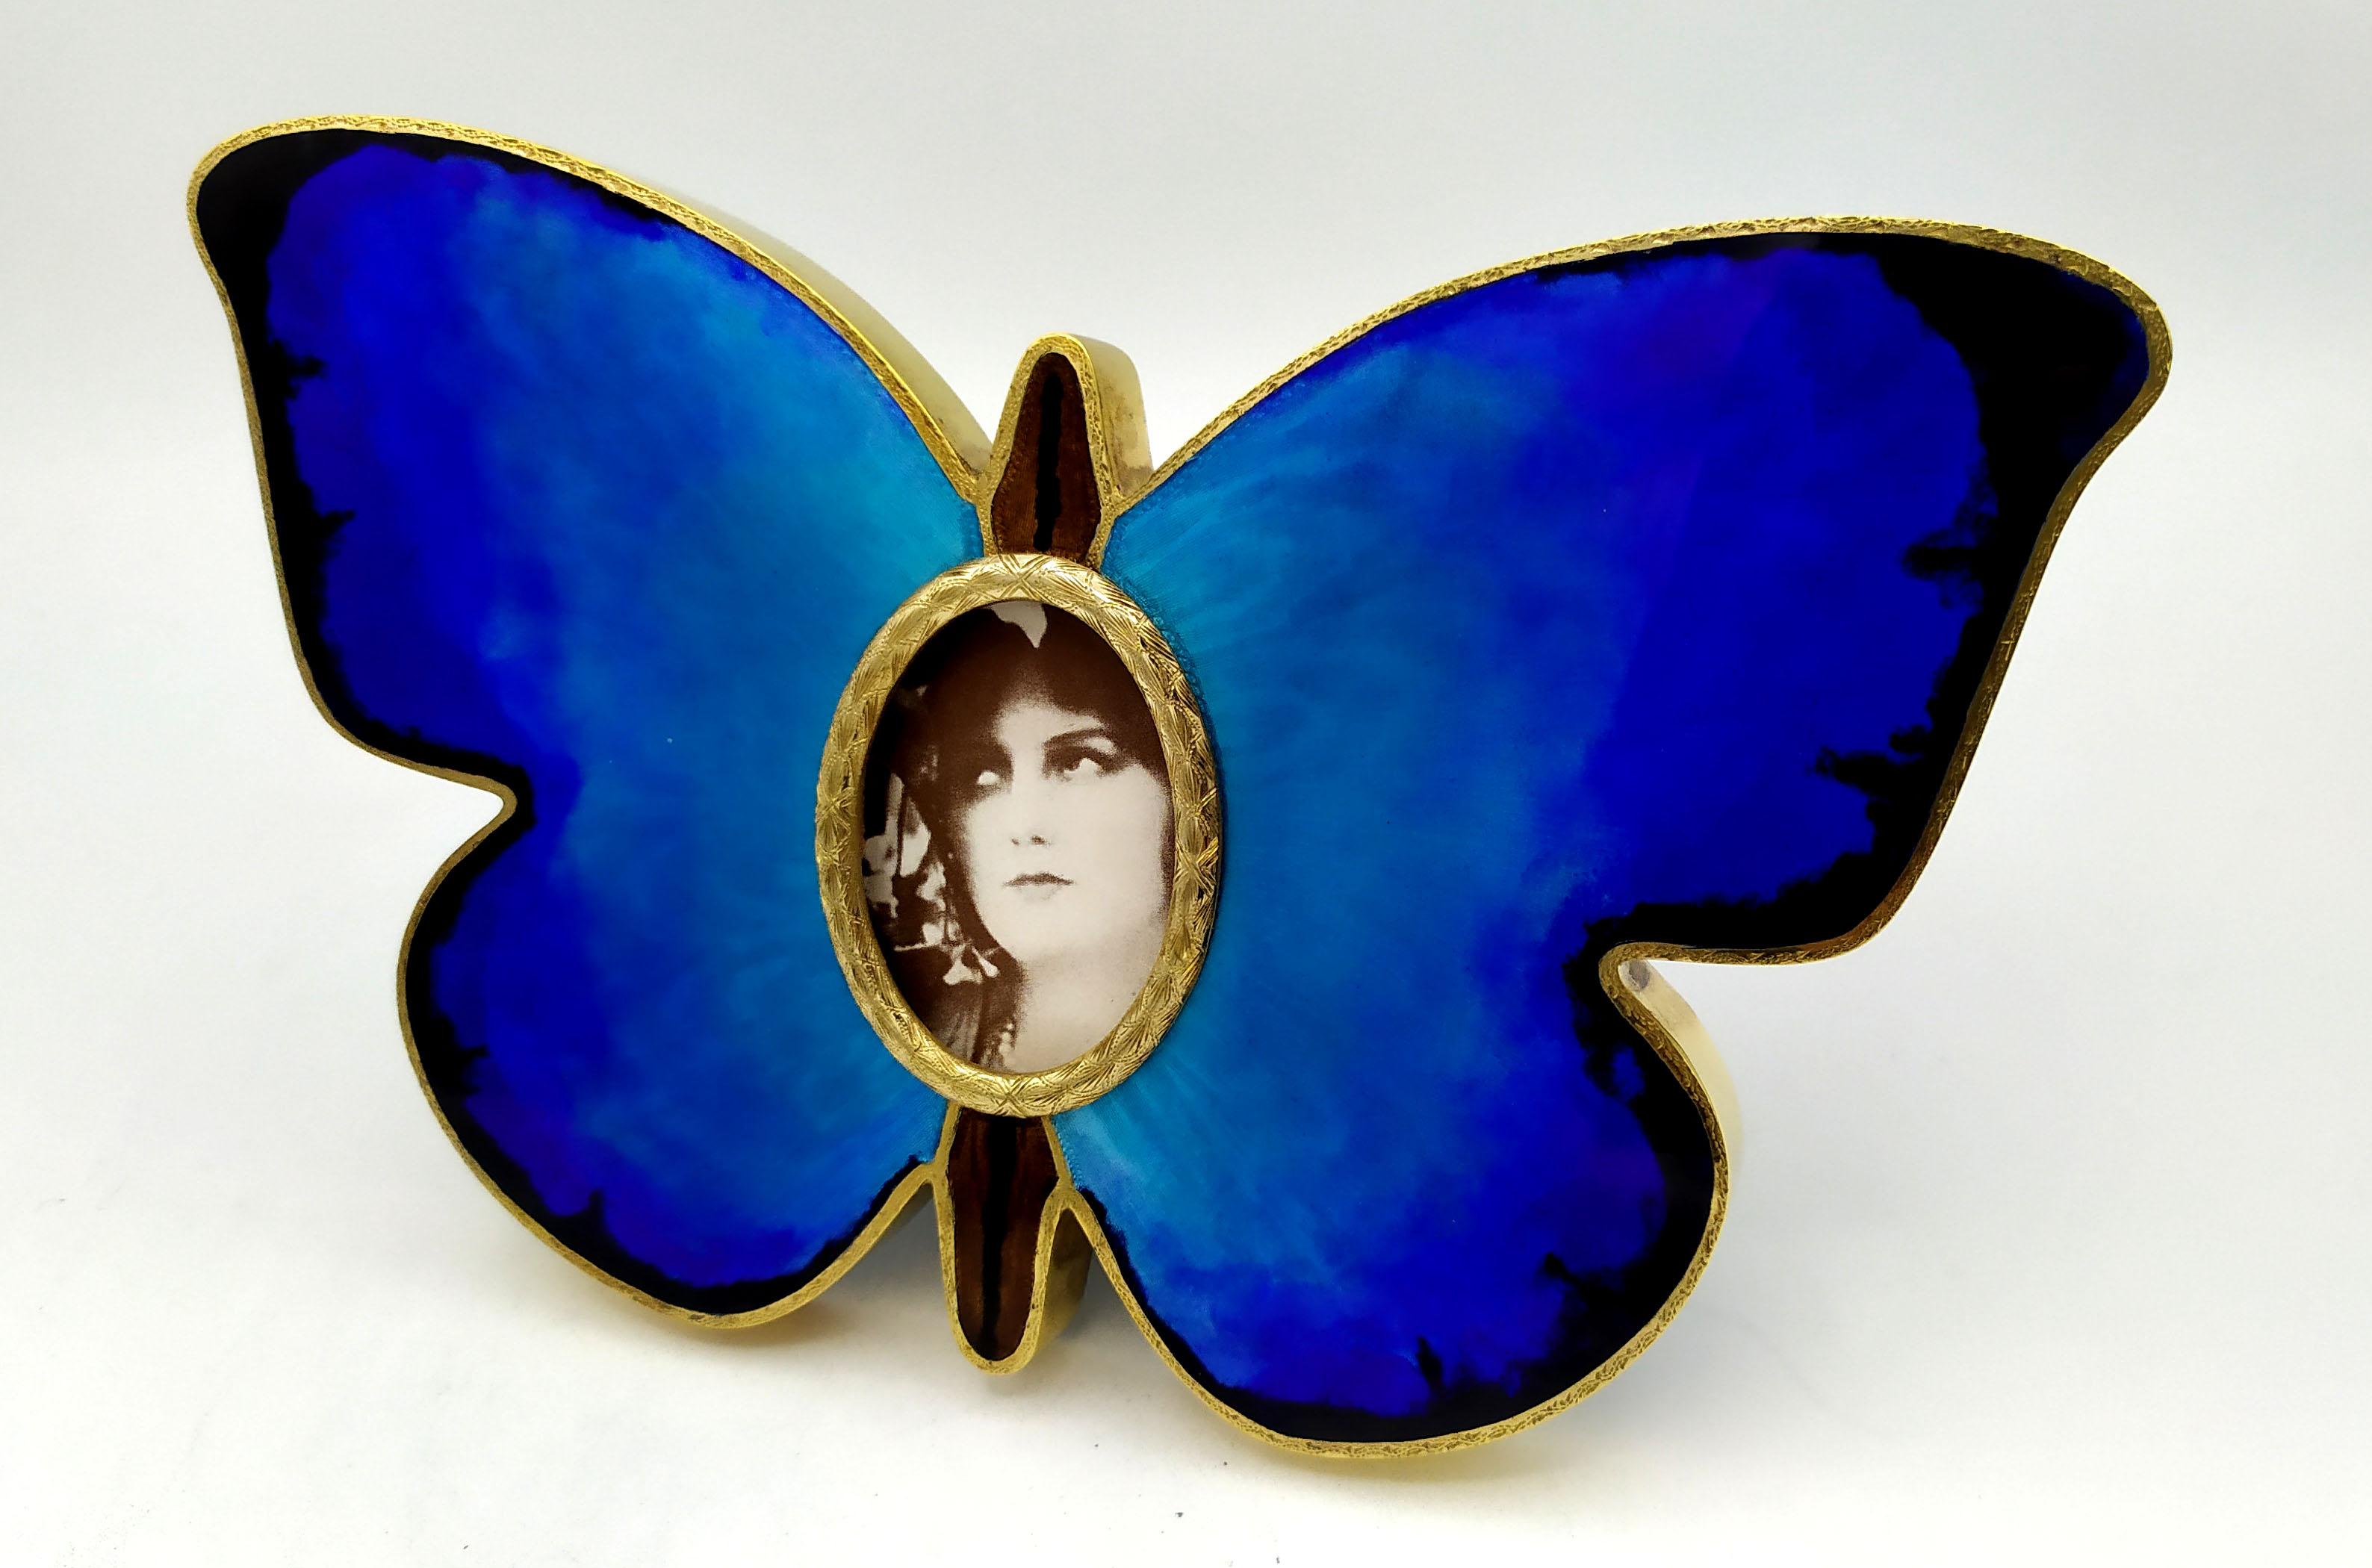 Butterfly-shaped photo frame in 925/1000 sterling silver gold plated with translucent polychrome fired enamels on hand engraving that imitates the veins of the wings. External dimensions cm. 12 x 19 oval for photos cm. 3.2 x 4.5. Weight gr. 220.